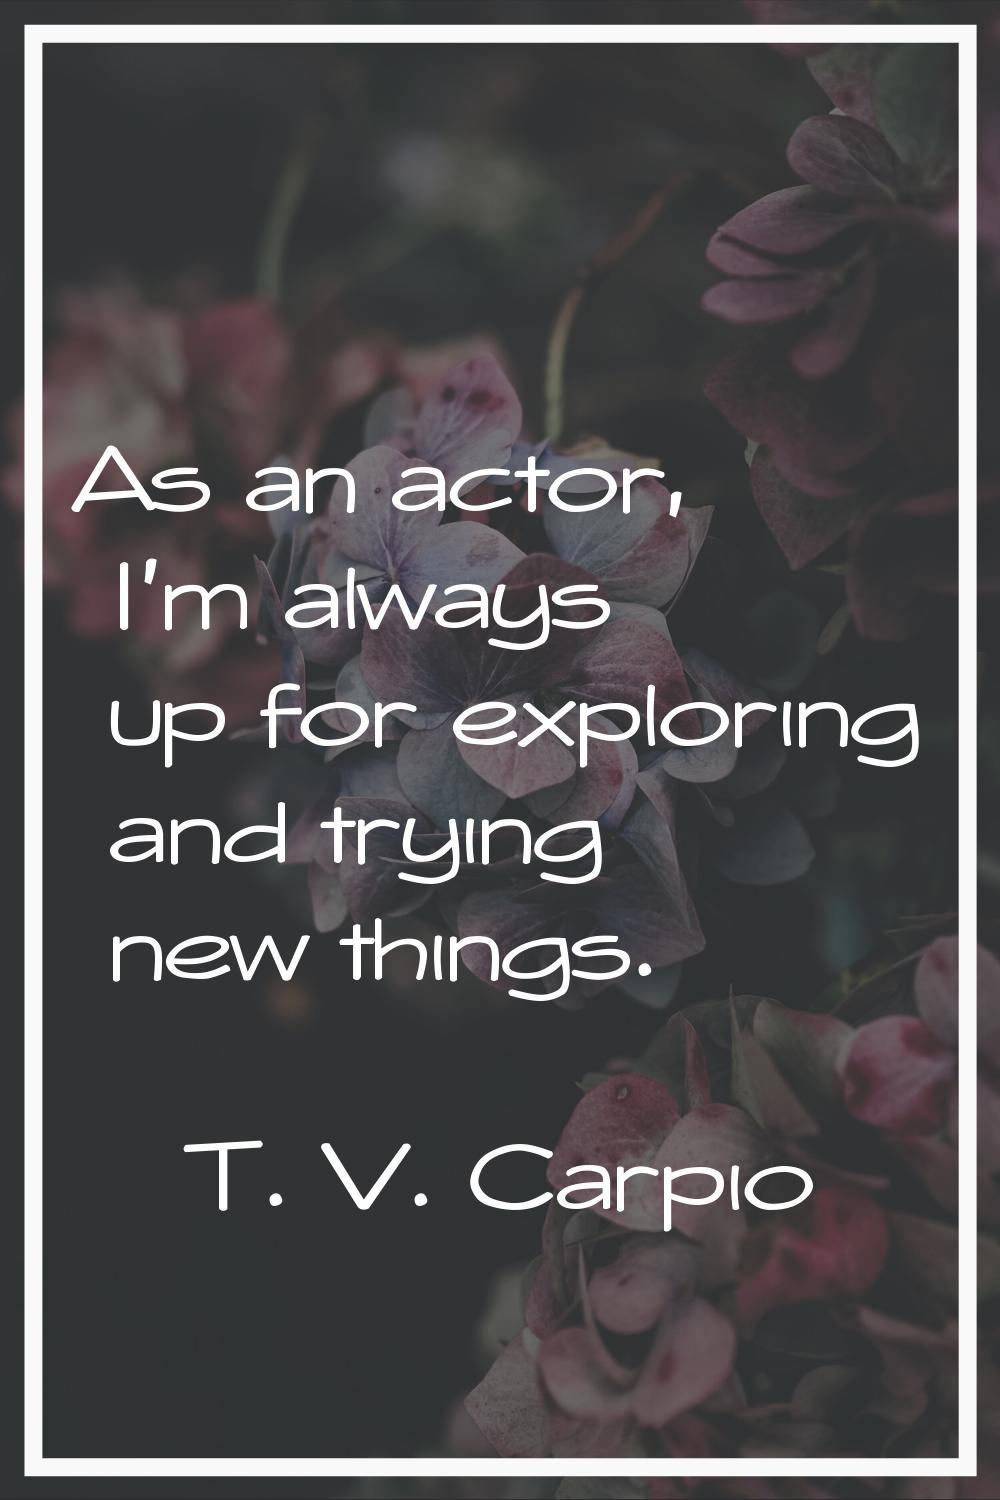 As an actor, I'm always up for exploring and trying new things.